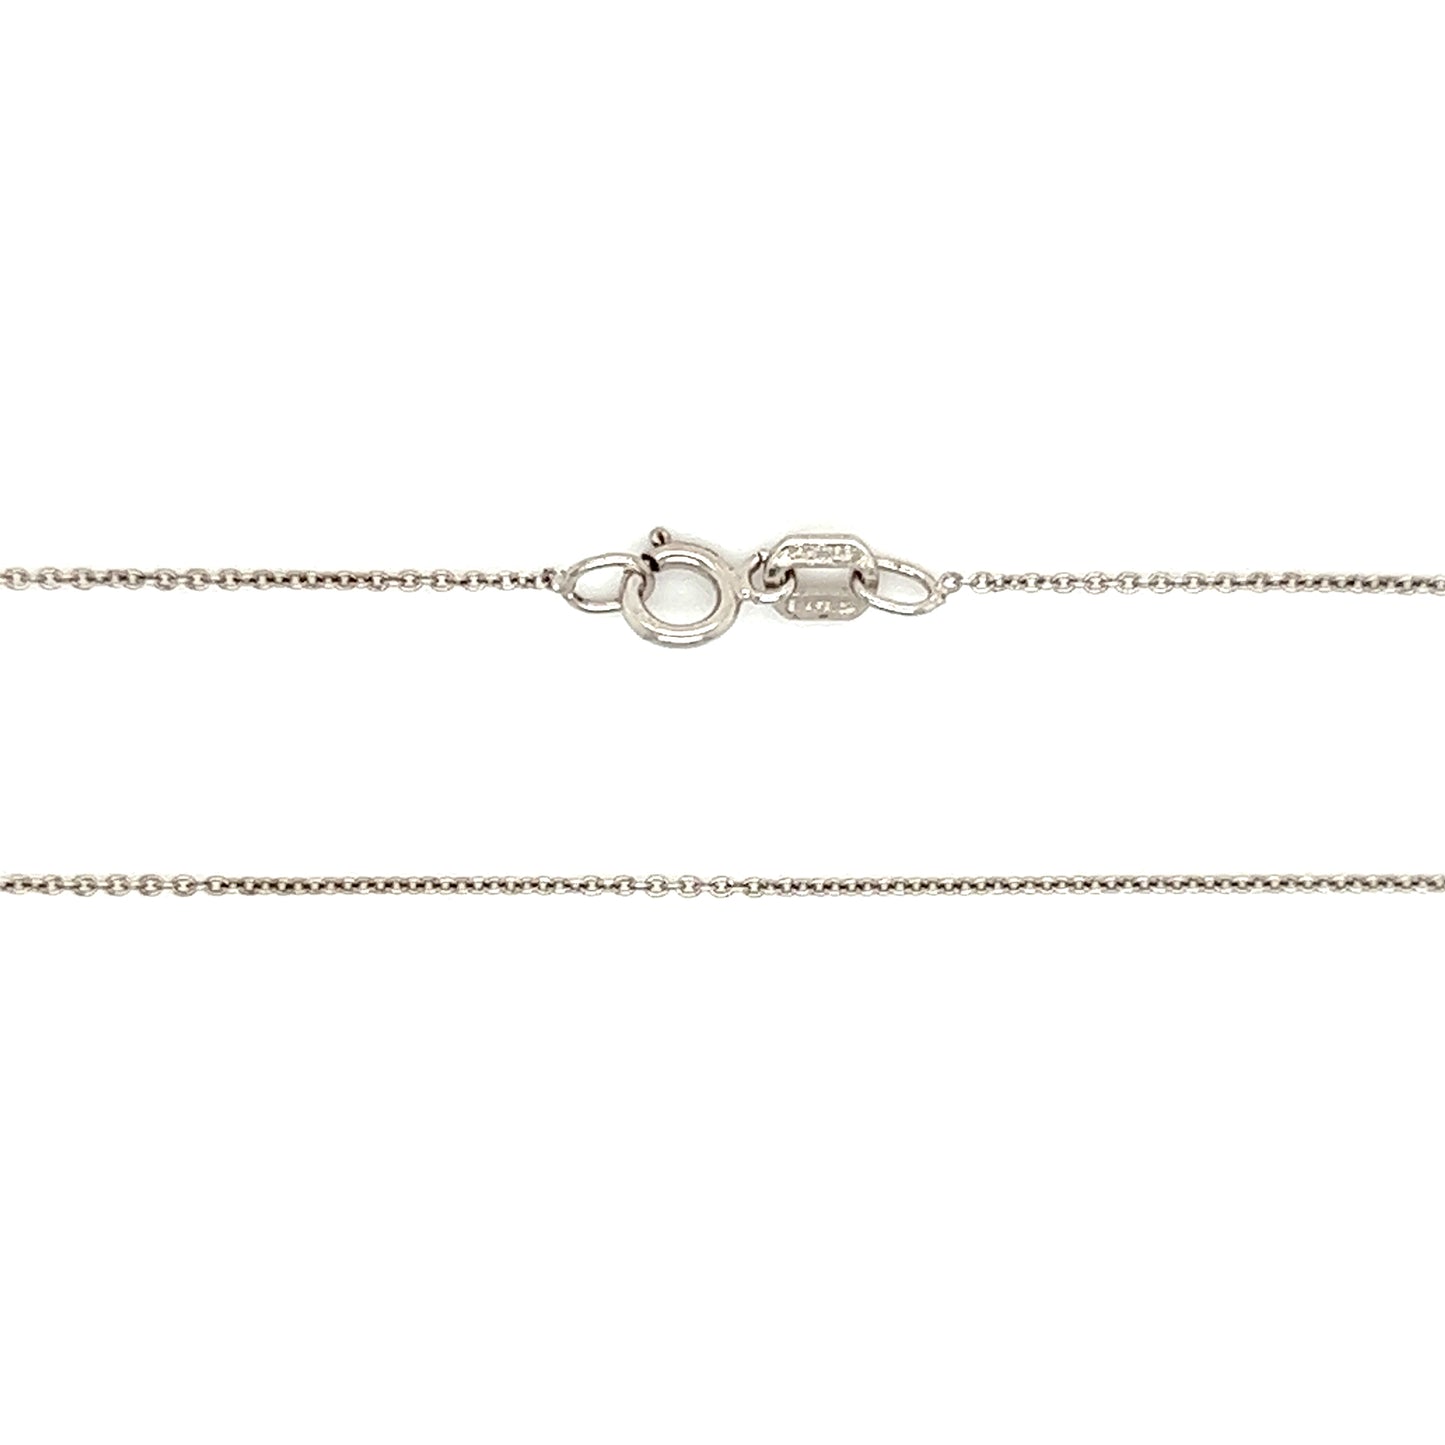 Cable 0.75mm Chain with 16in Length in 14K White Gold Chain and Clasp View